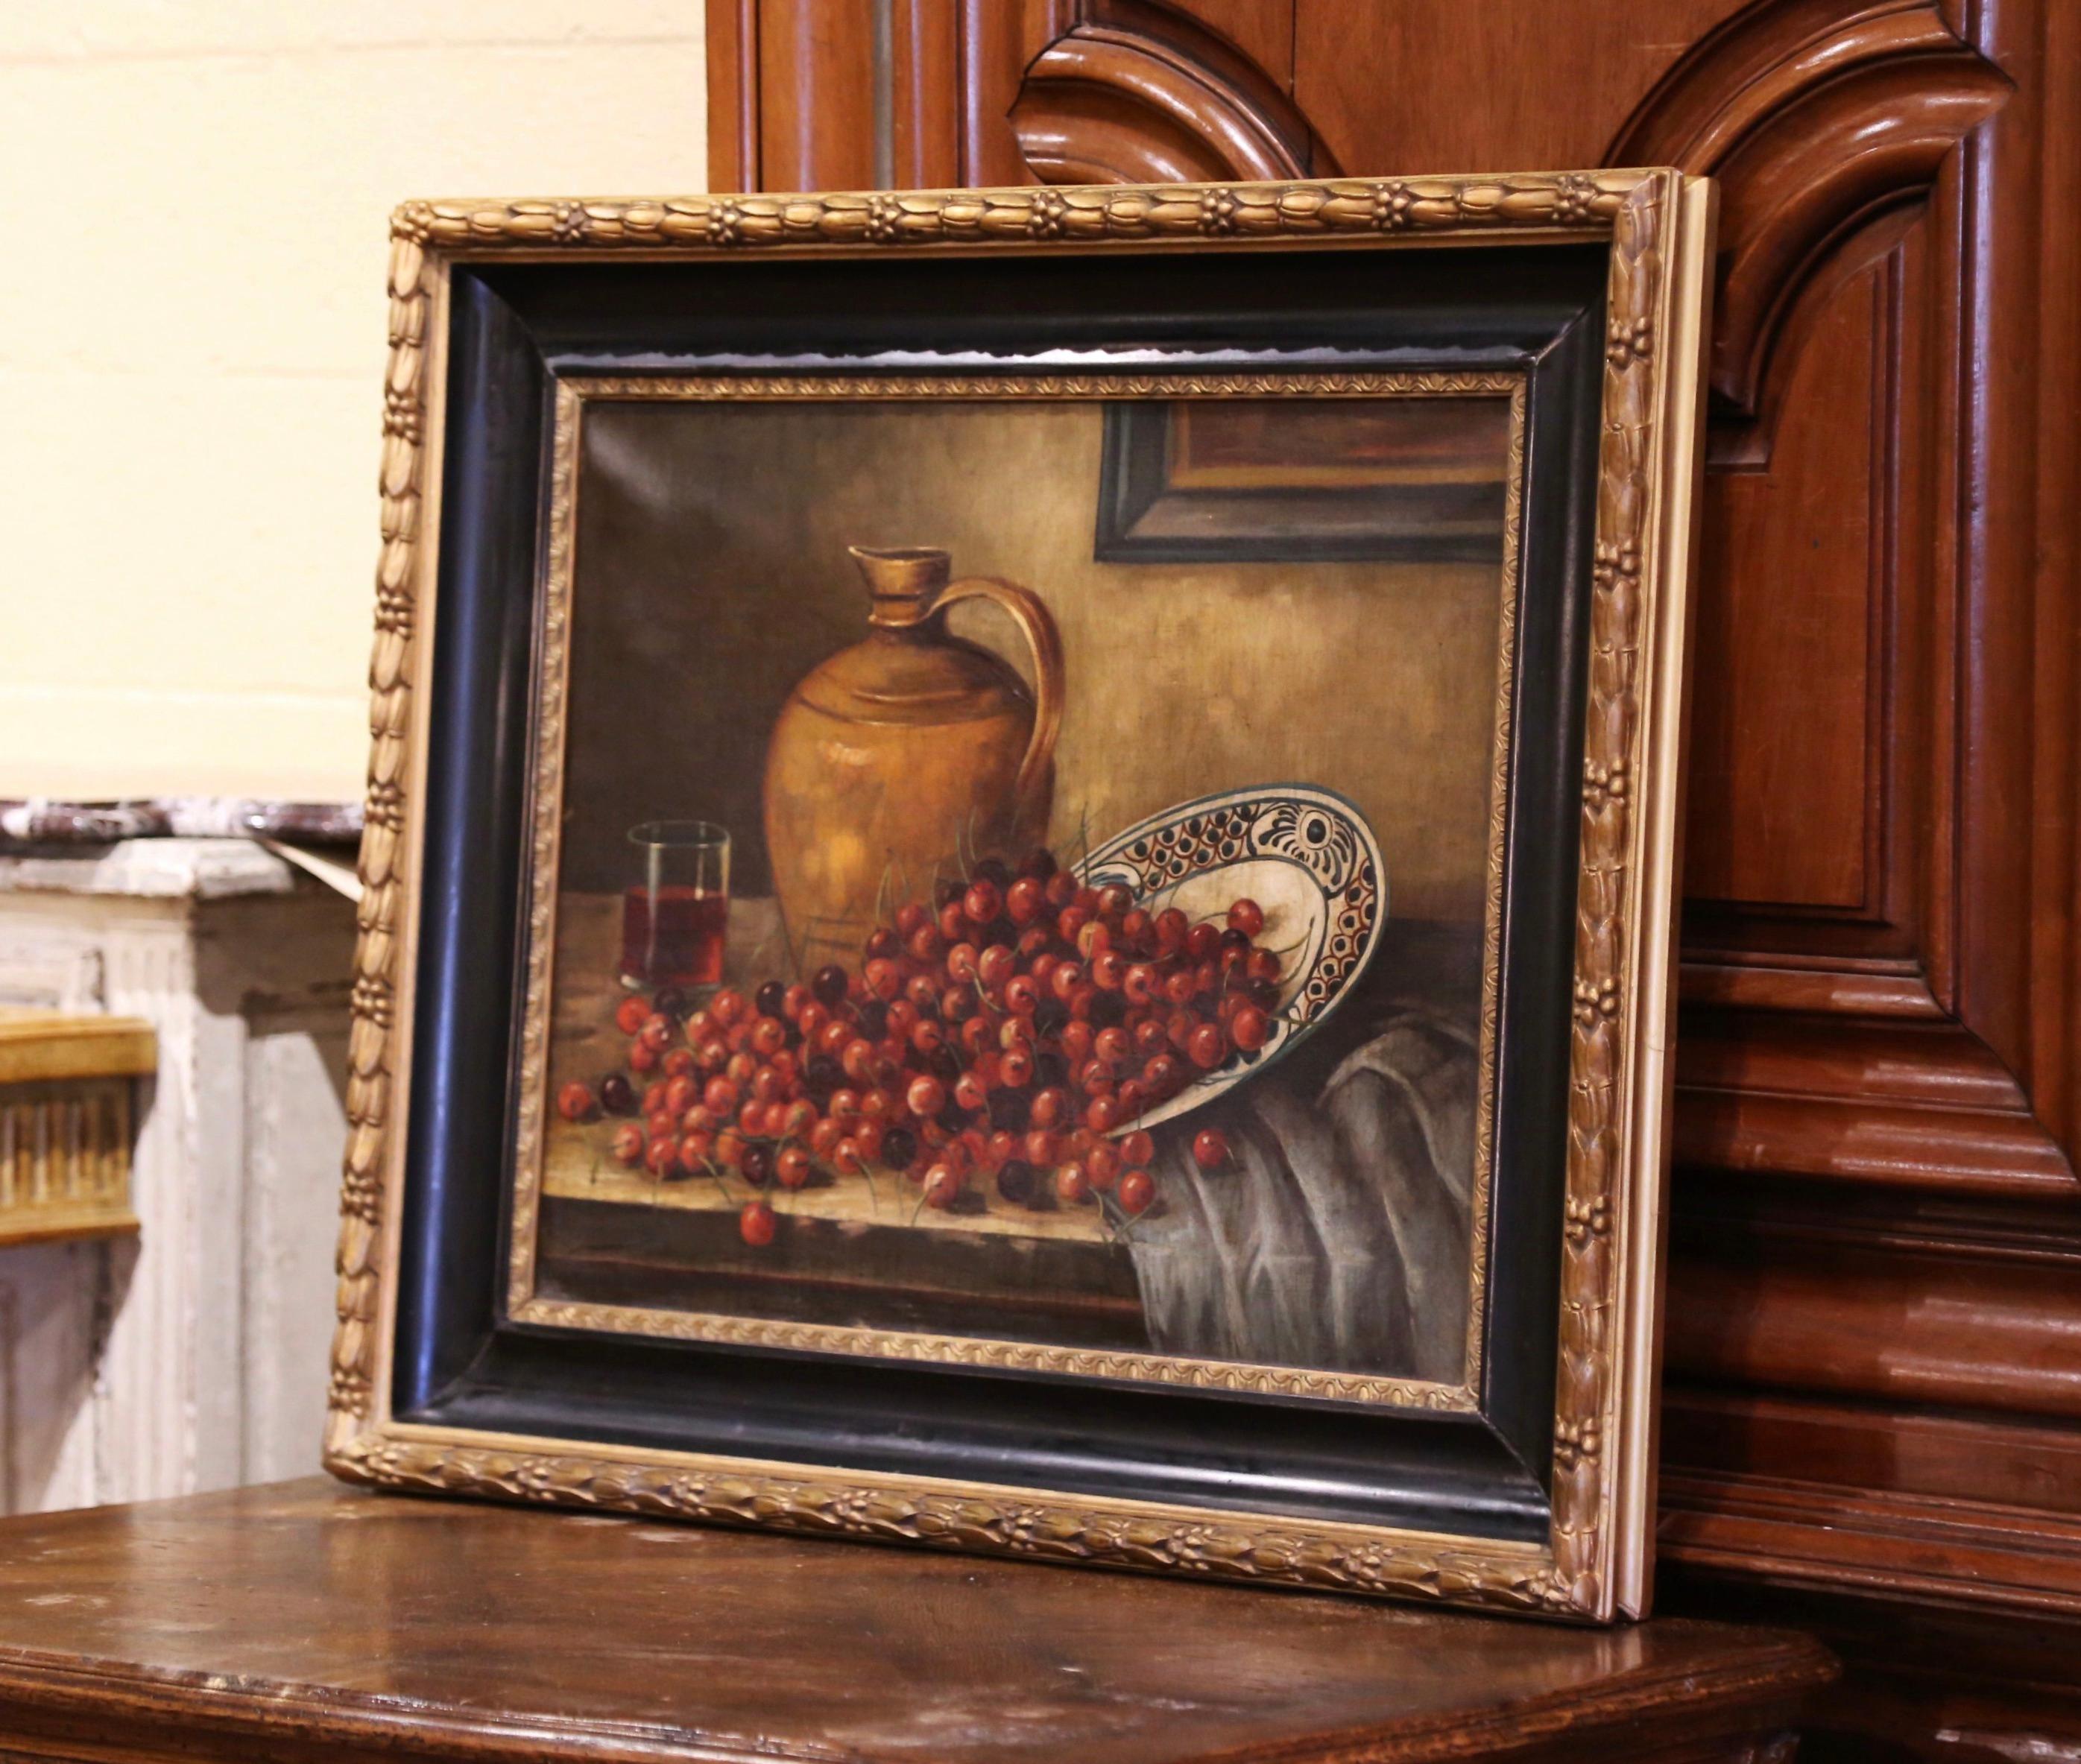 Hand painted in France circa 1880 and set in the original carved two-tone giltwood and blackened frame, the large art work depicts a table still life subject with grapes spilling out from a faience plate with a terracotta wine jug and a glass in the